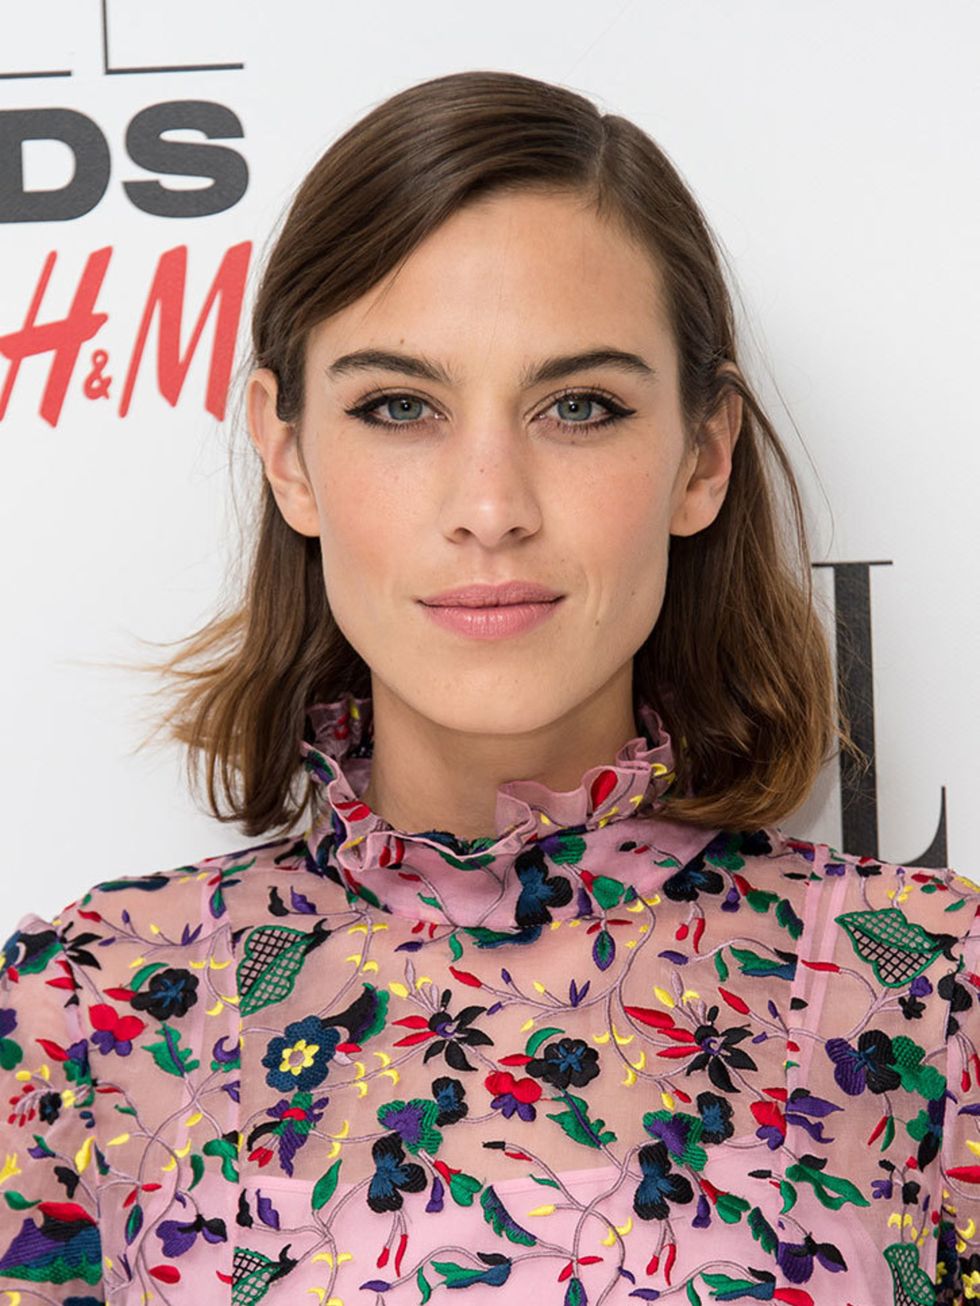 <p><a href="http://www.elleuk.com/elle-style-awards/red-carpet-celebrity-best-dresses-2015#image=1">Alexa</a> keeps it simple with her signature feline liner. The boyish side part works well to balance the ruffled collar on her floral Erdem dress, we love